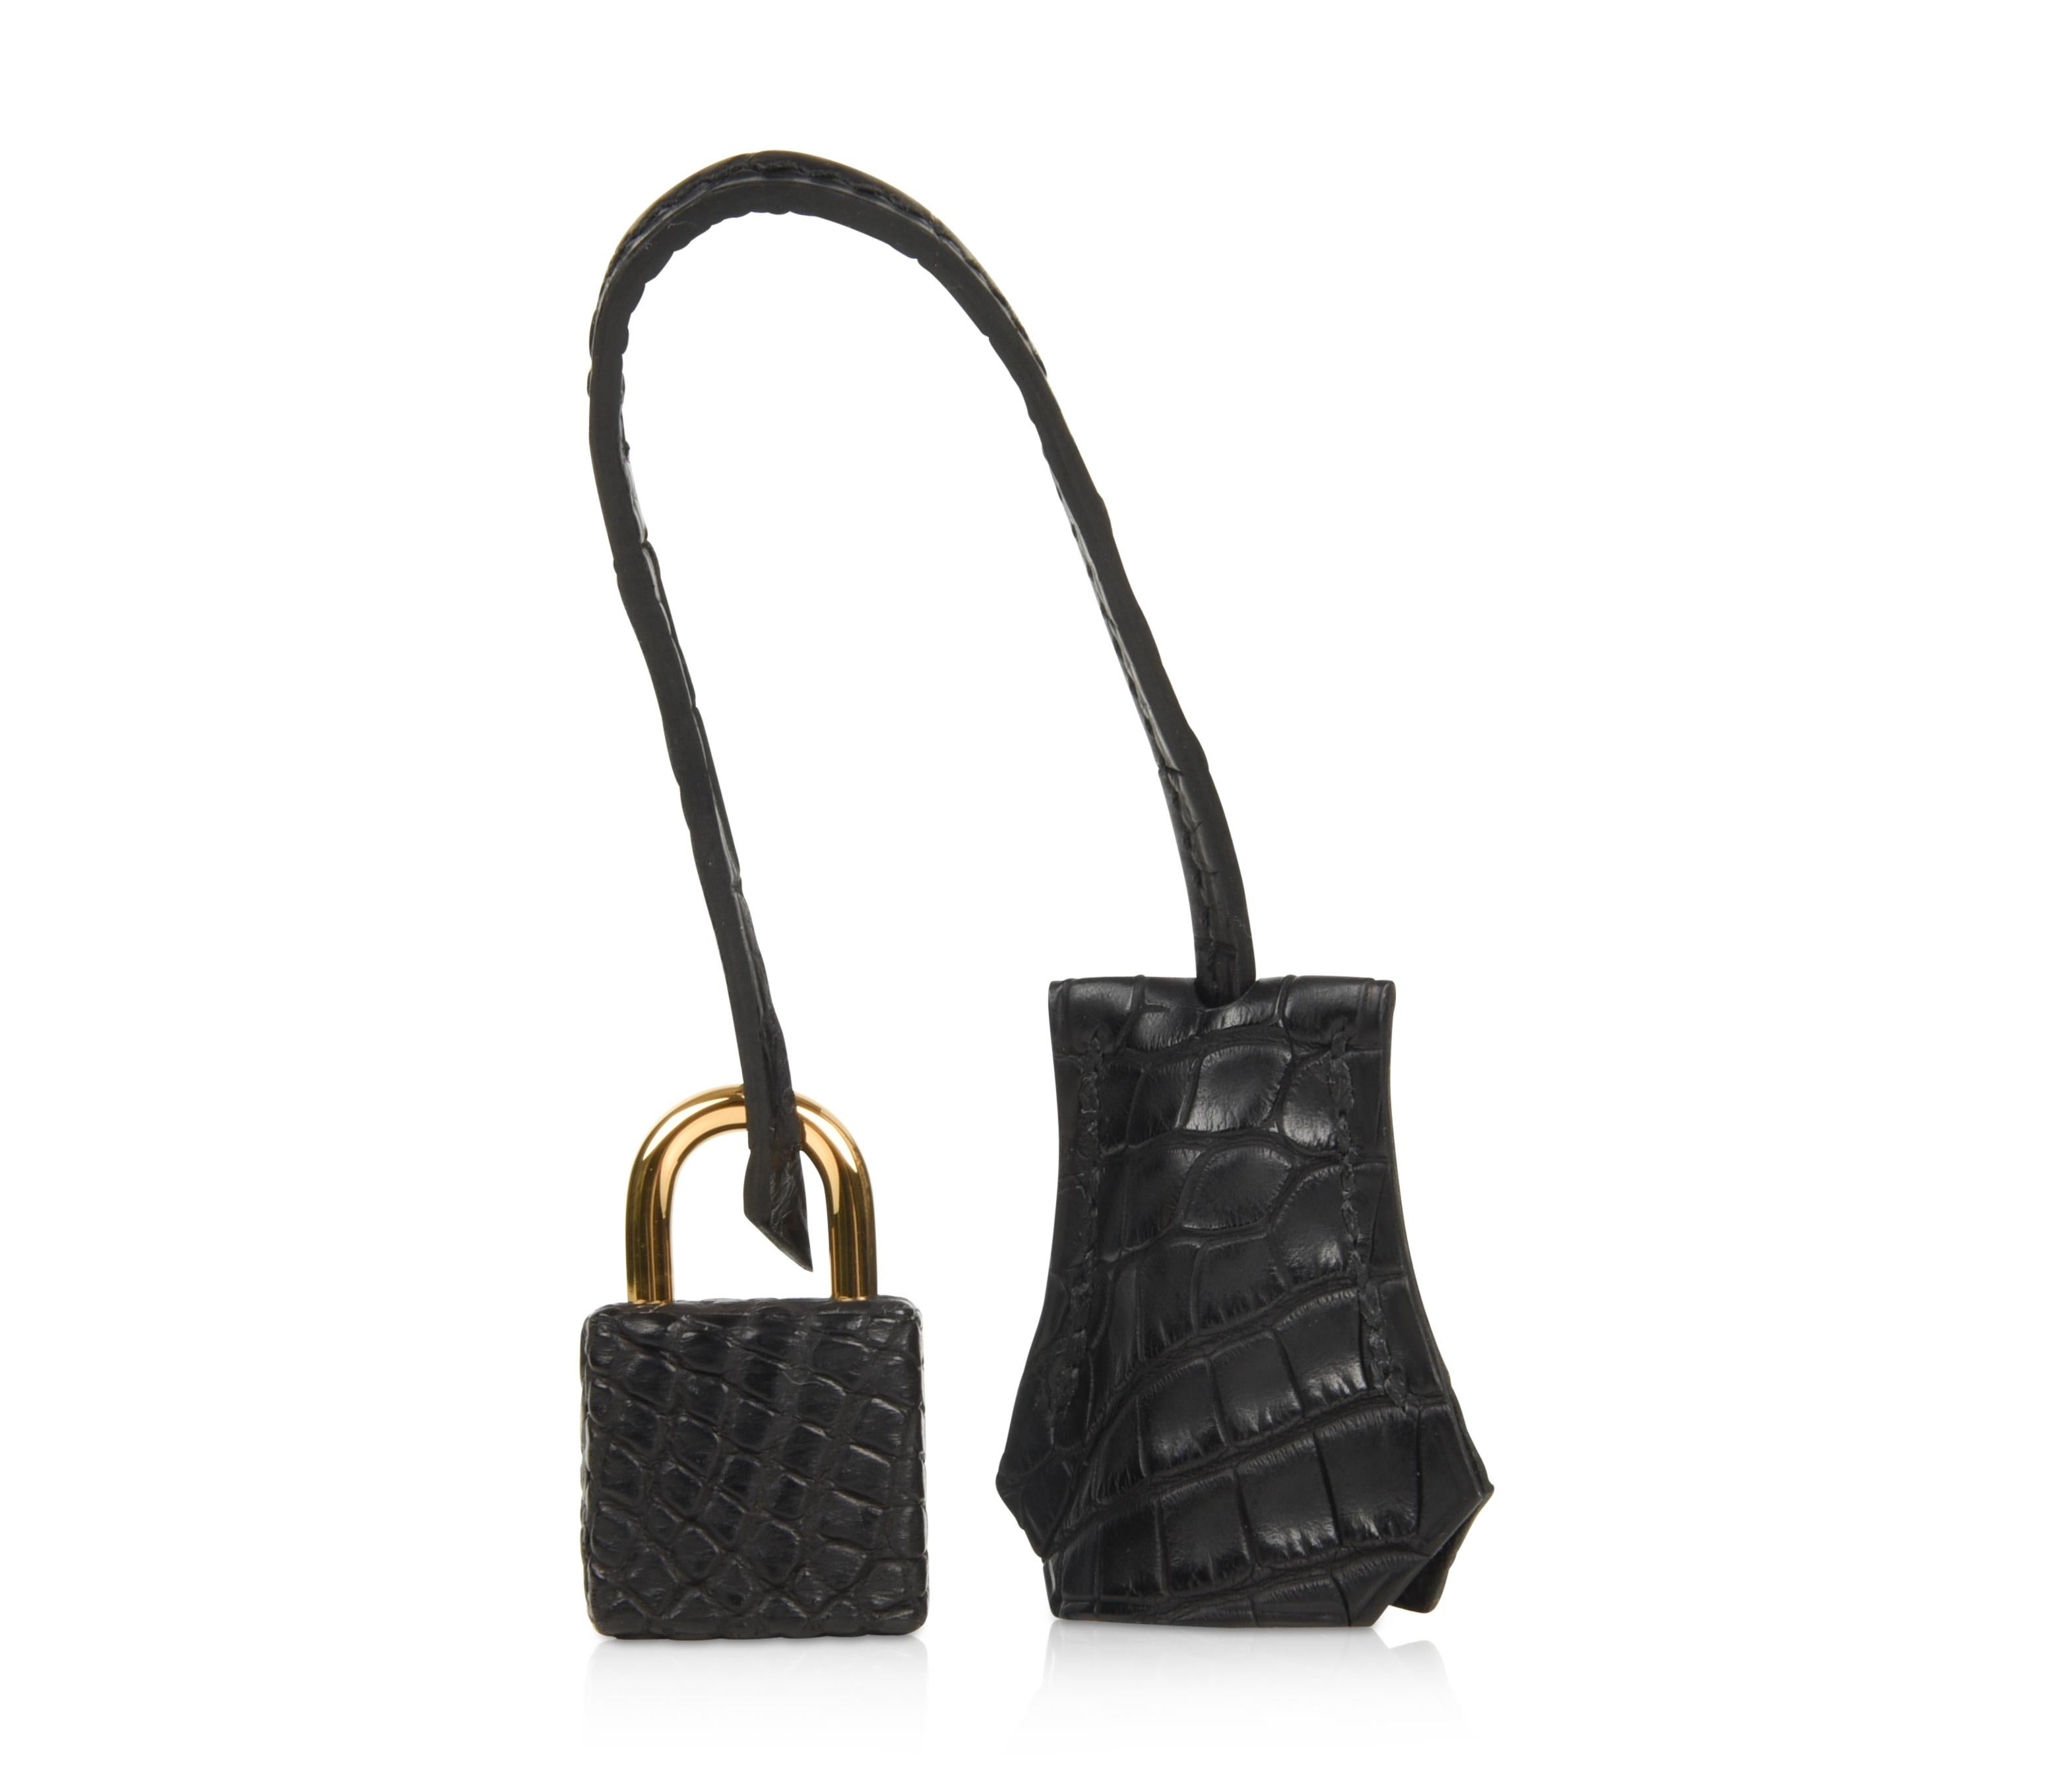 Rich with gold hardware this beautiful black alligator bag is chic day to evening.
Comes with lock, keys, clochette, sleepers, raincoat and signature Hermes orange box.
NEW or NEVER WORN
The Hermes Birkin 25cm price maintains its value due to the